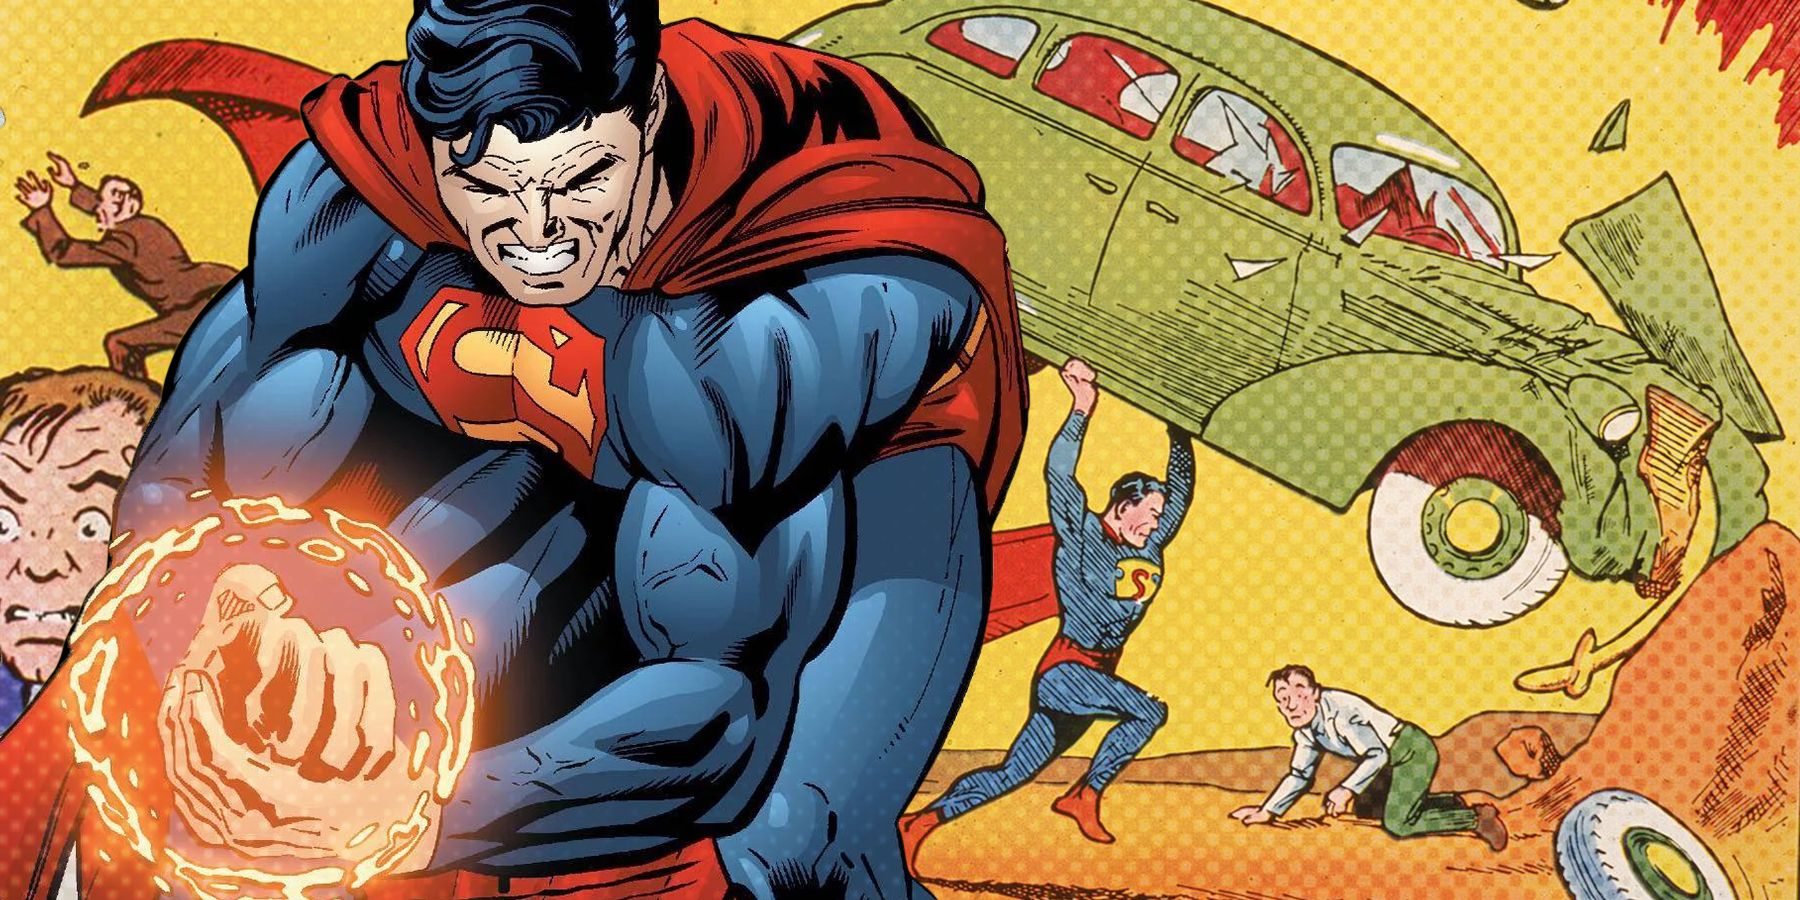 Superman containing a black hole in his hand and lifting a car off of a scared civillian